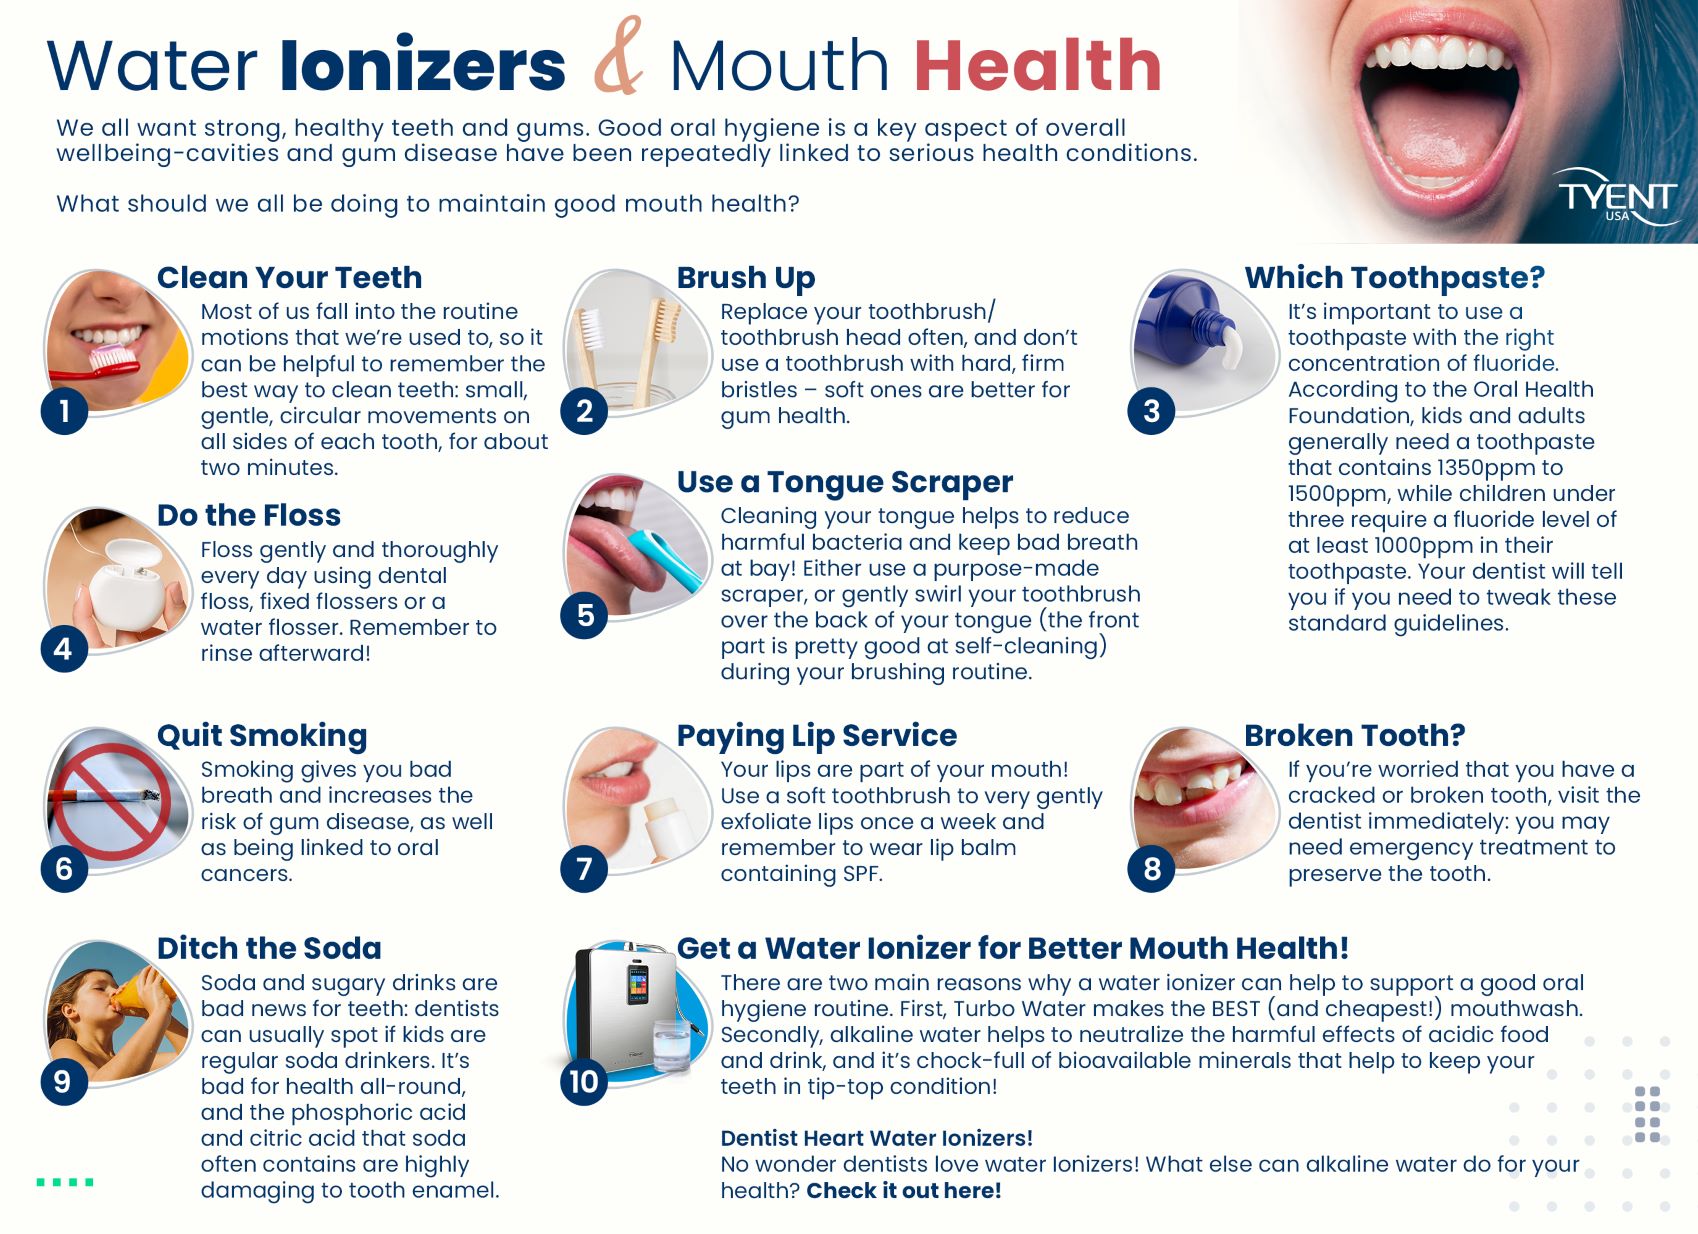 Water Ionizers and Mouth Health (infographic)